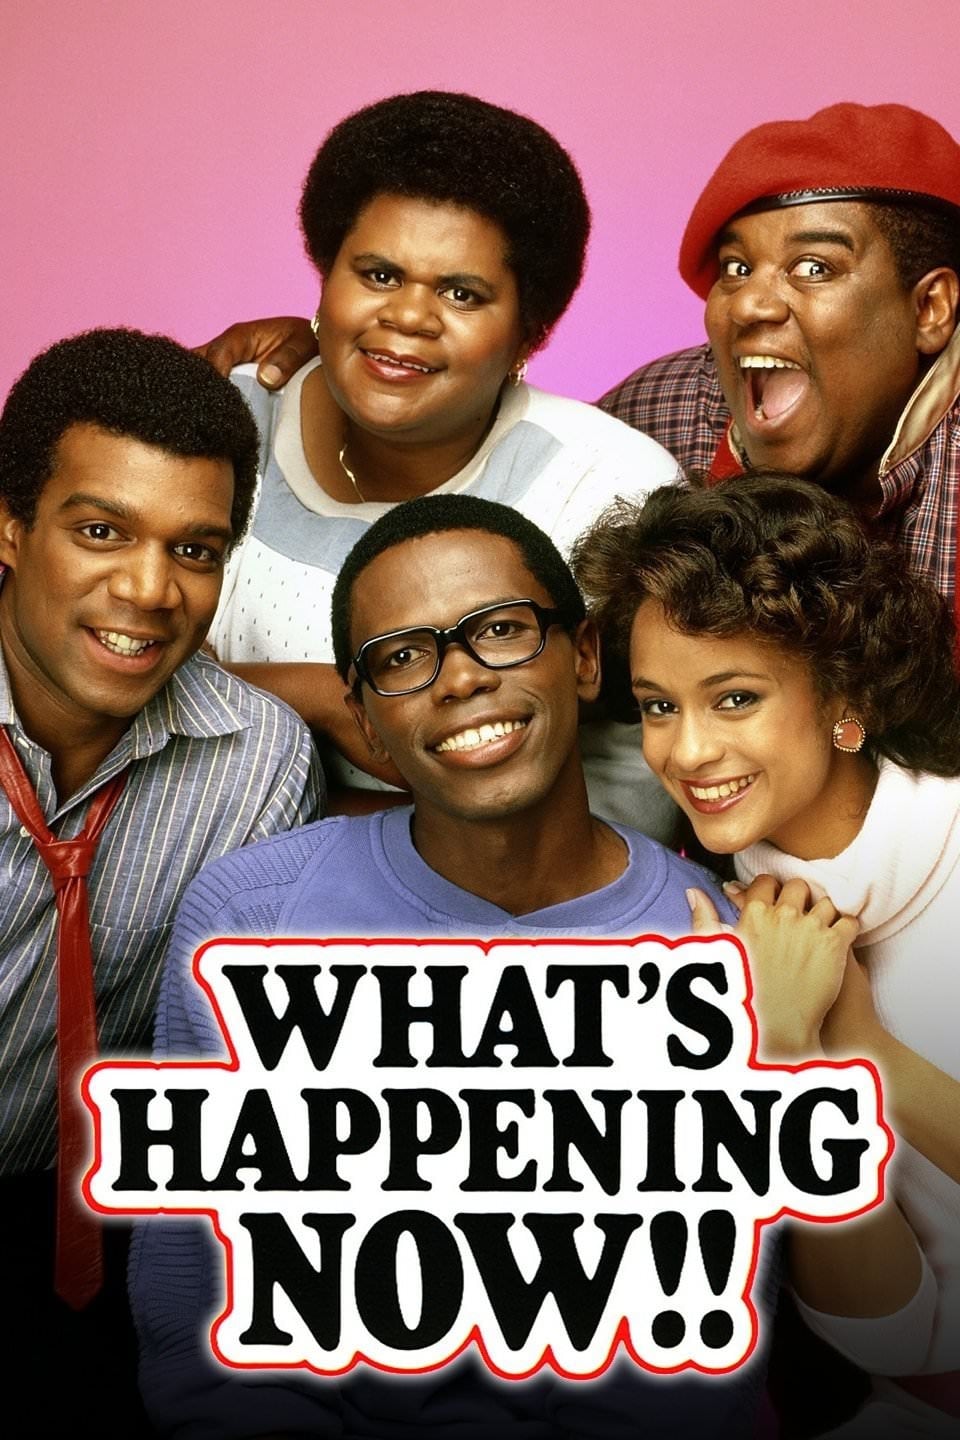 What's Happening Now!! (1985)